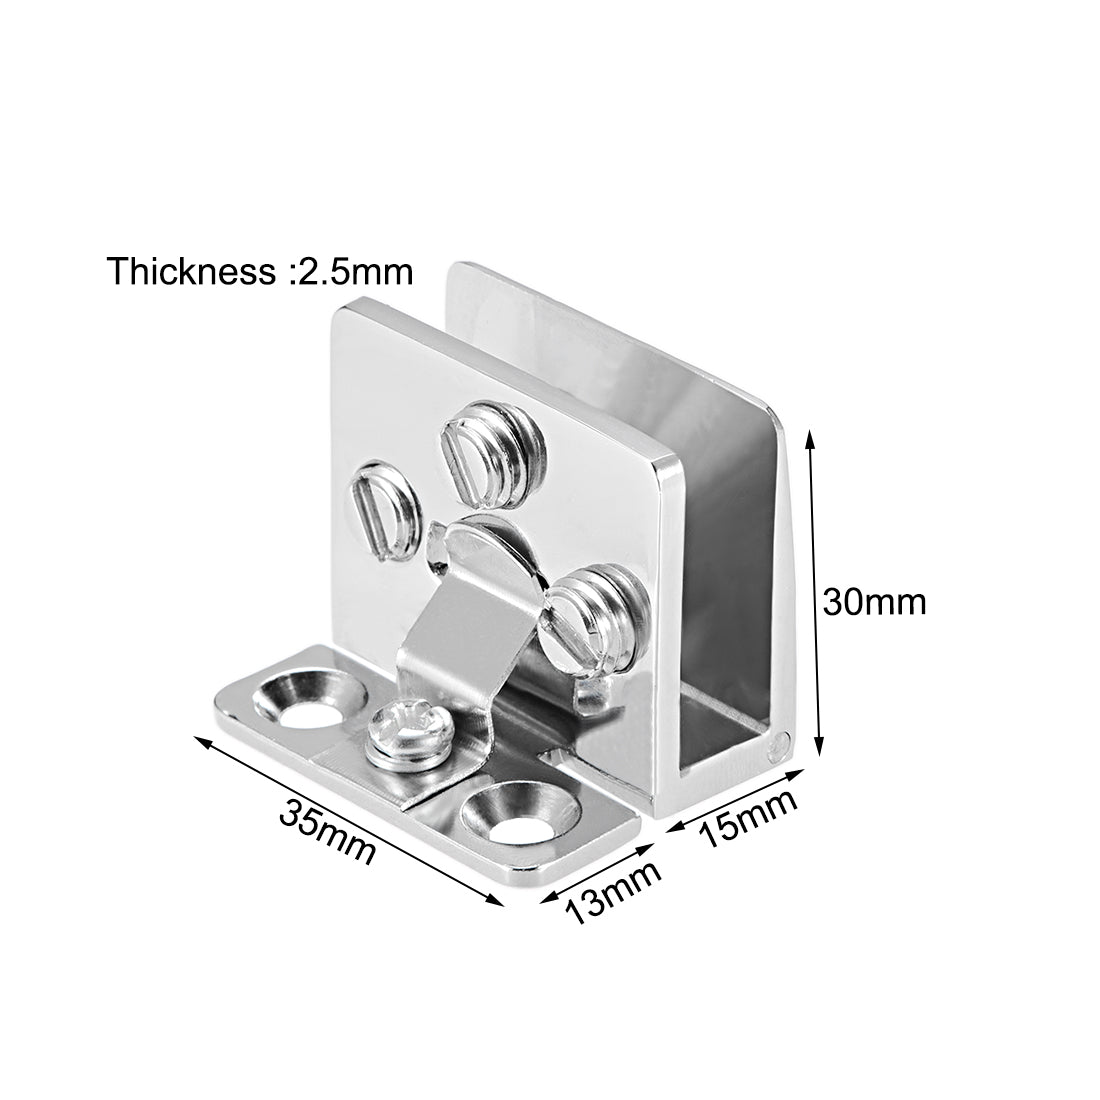 uxcell Uxcell Glass Hinge Cupboard Showcase Cabinet Door Hinge Clamp Zinc Alloy for 5-8mm Thickness 4 Pcs